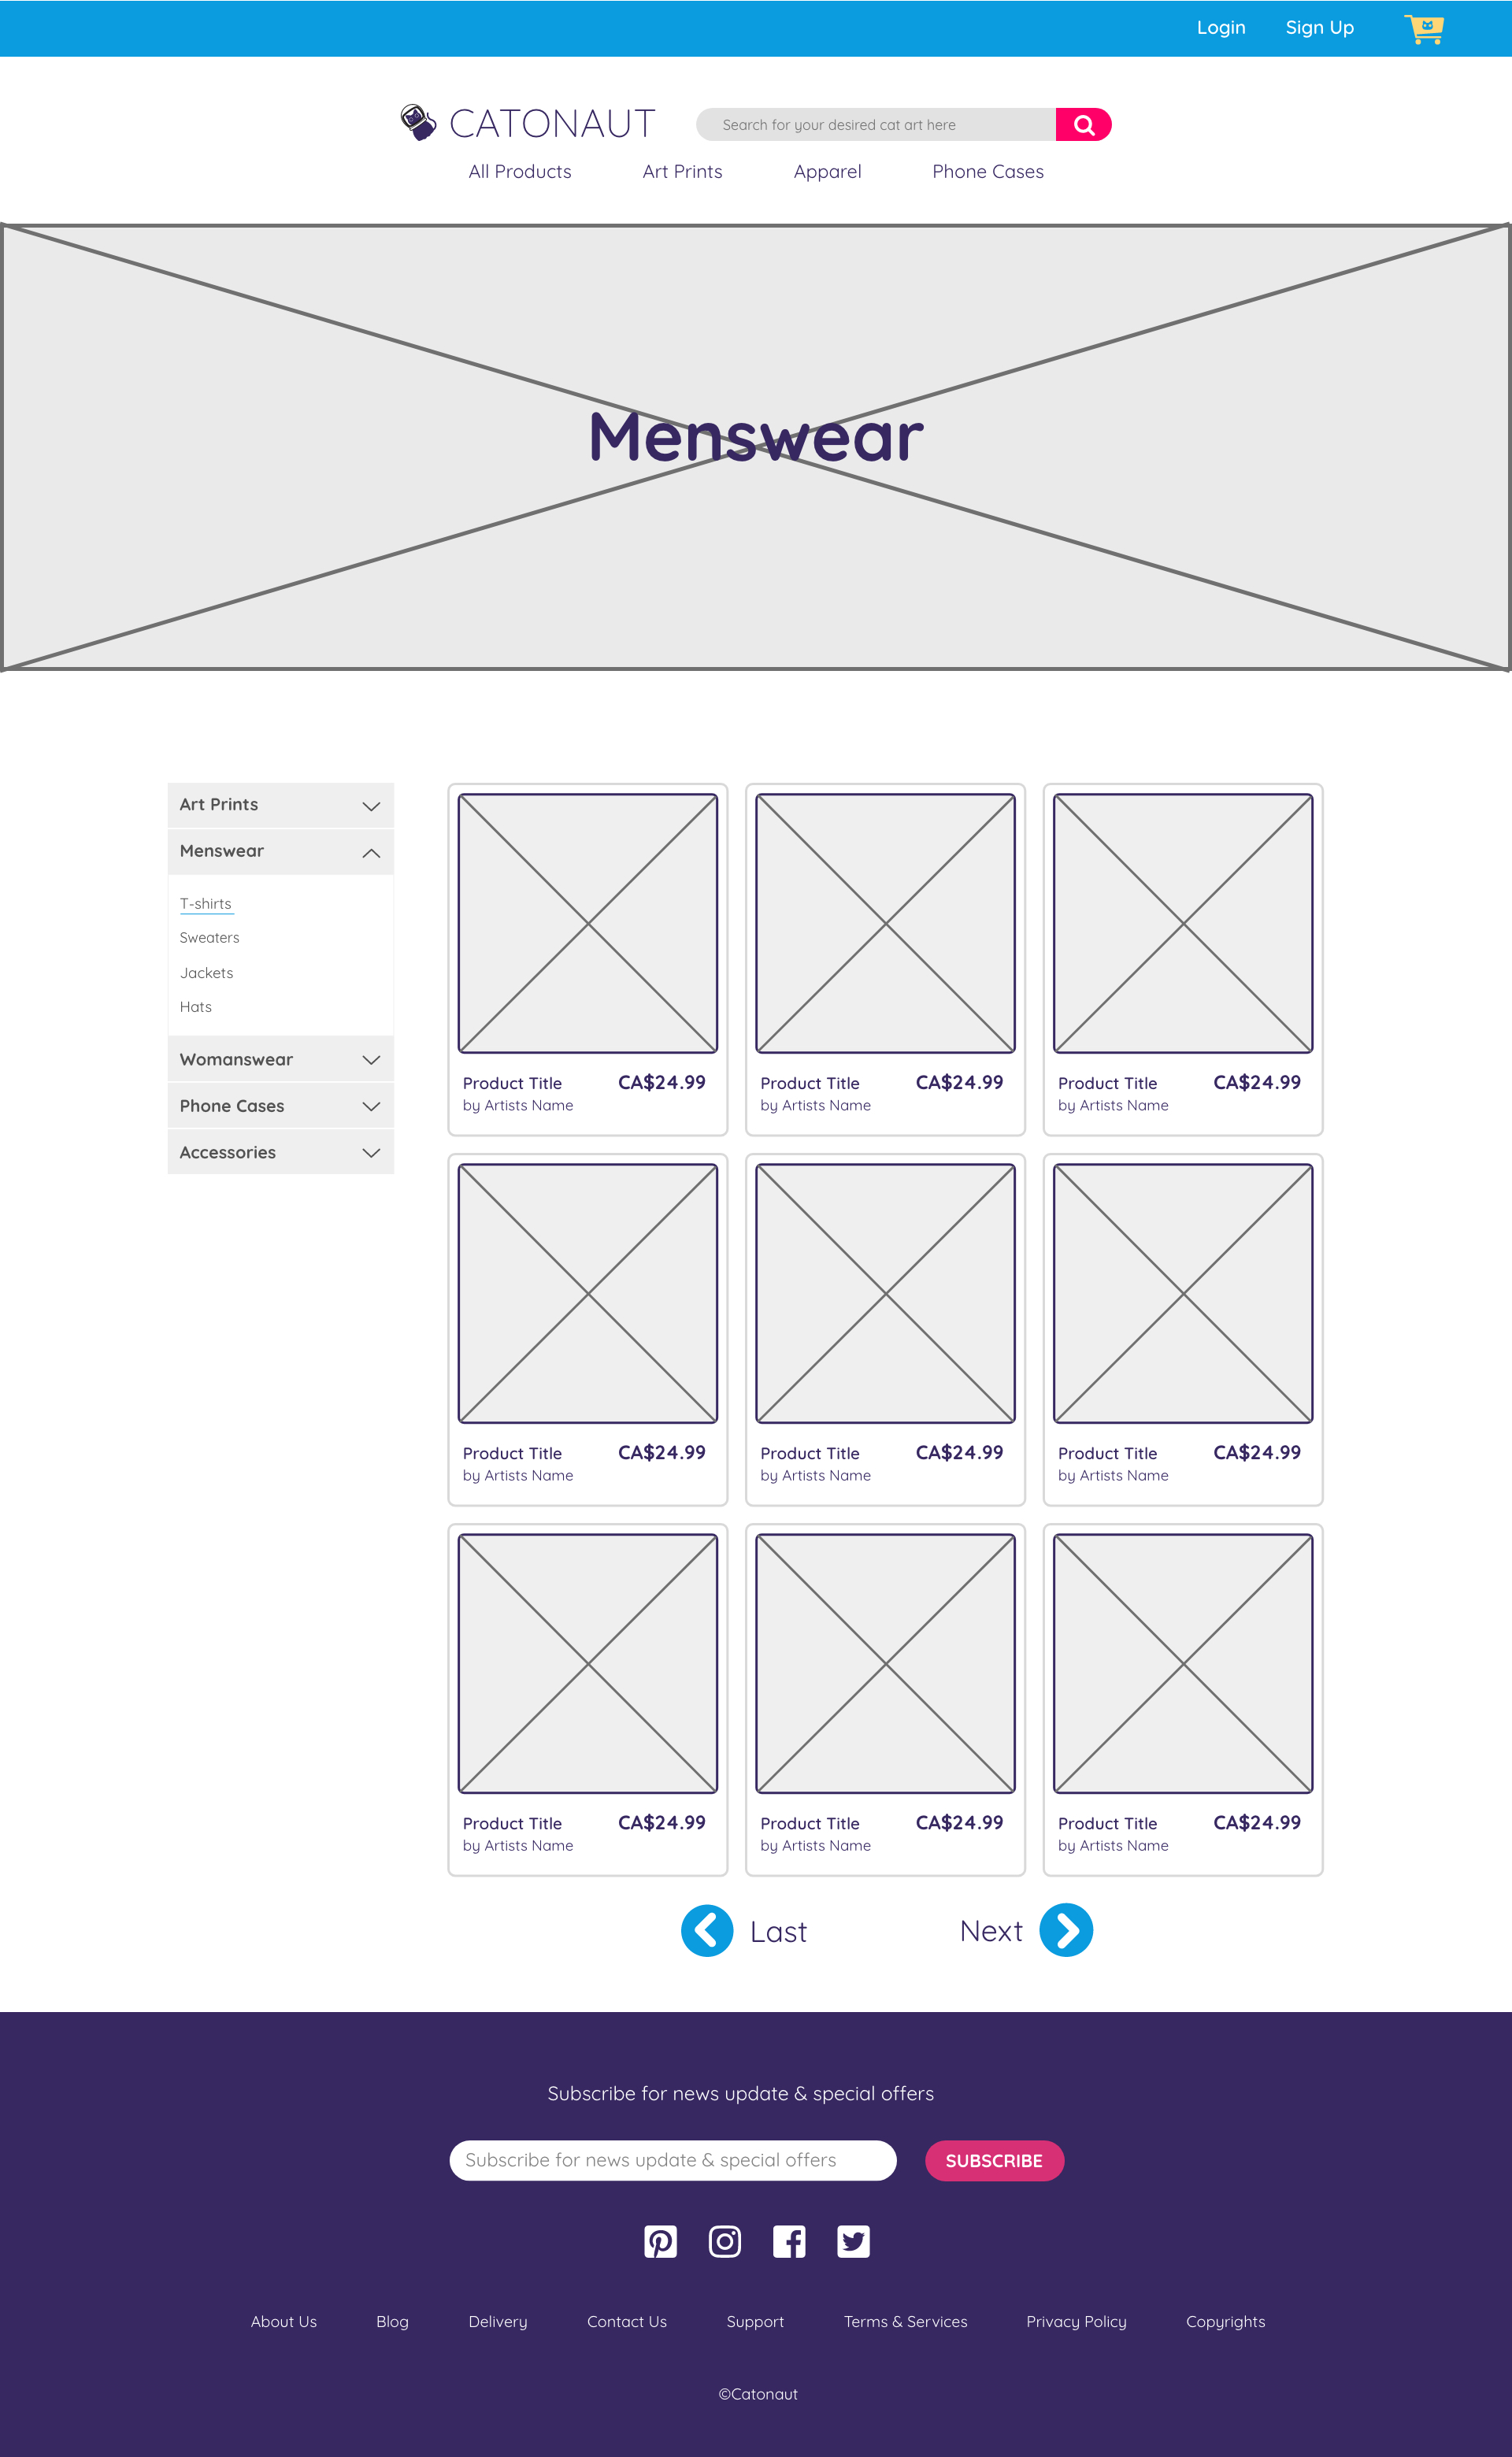 A wireframe image of the Catonaut website product list page.